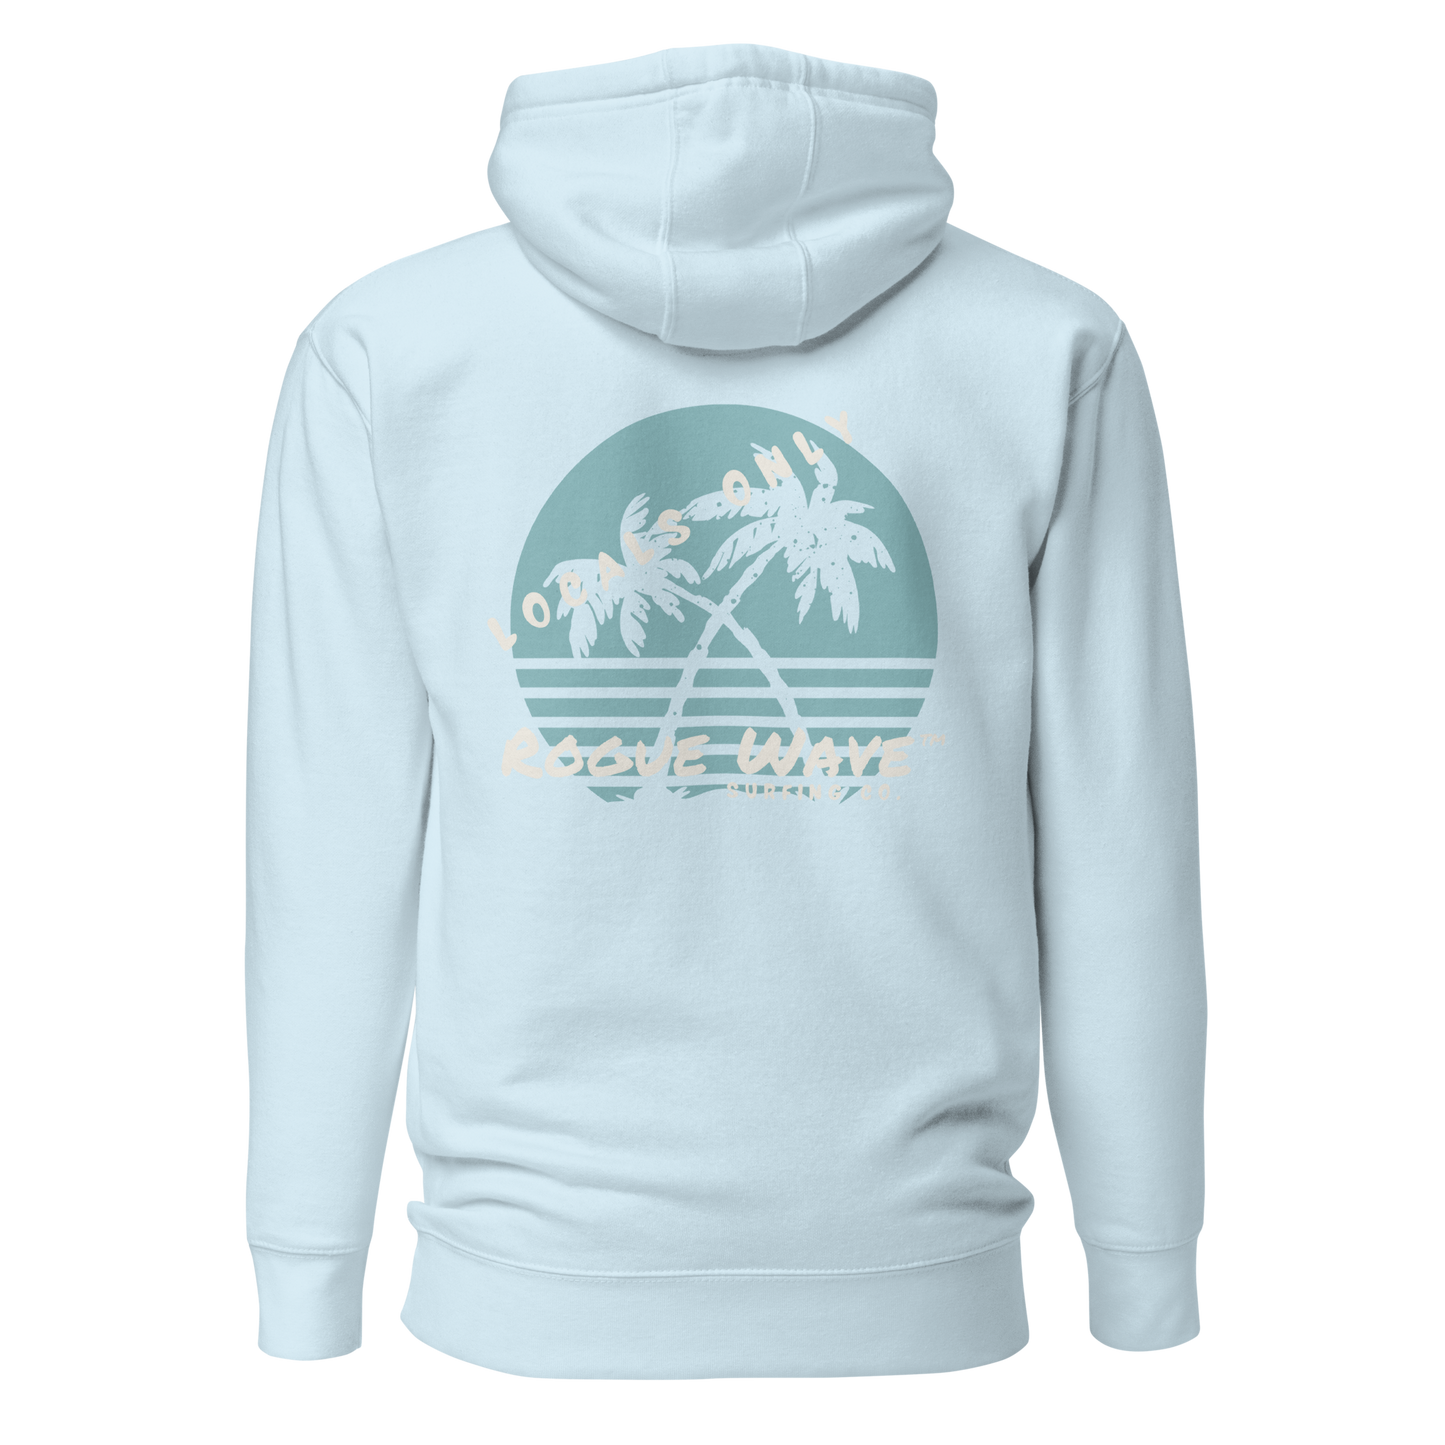 Rogue Wave Surfing Co™ Hoodie - Locals Only